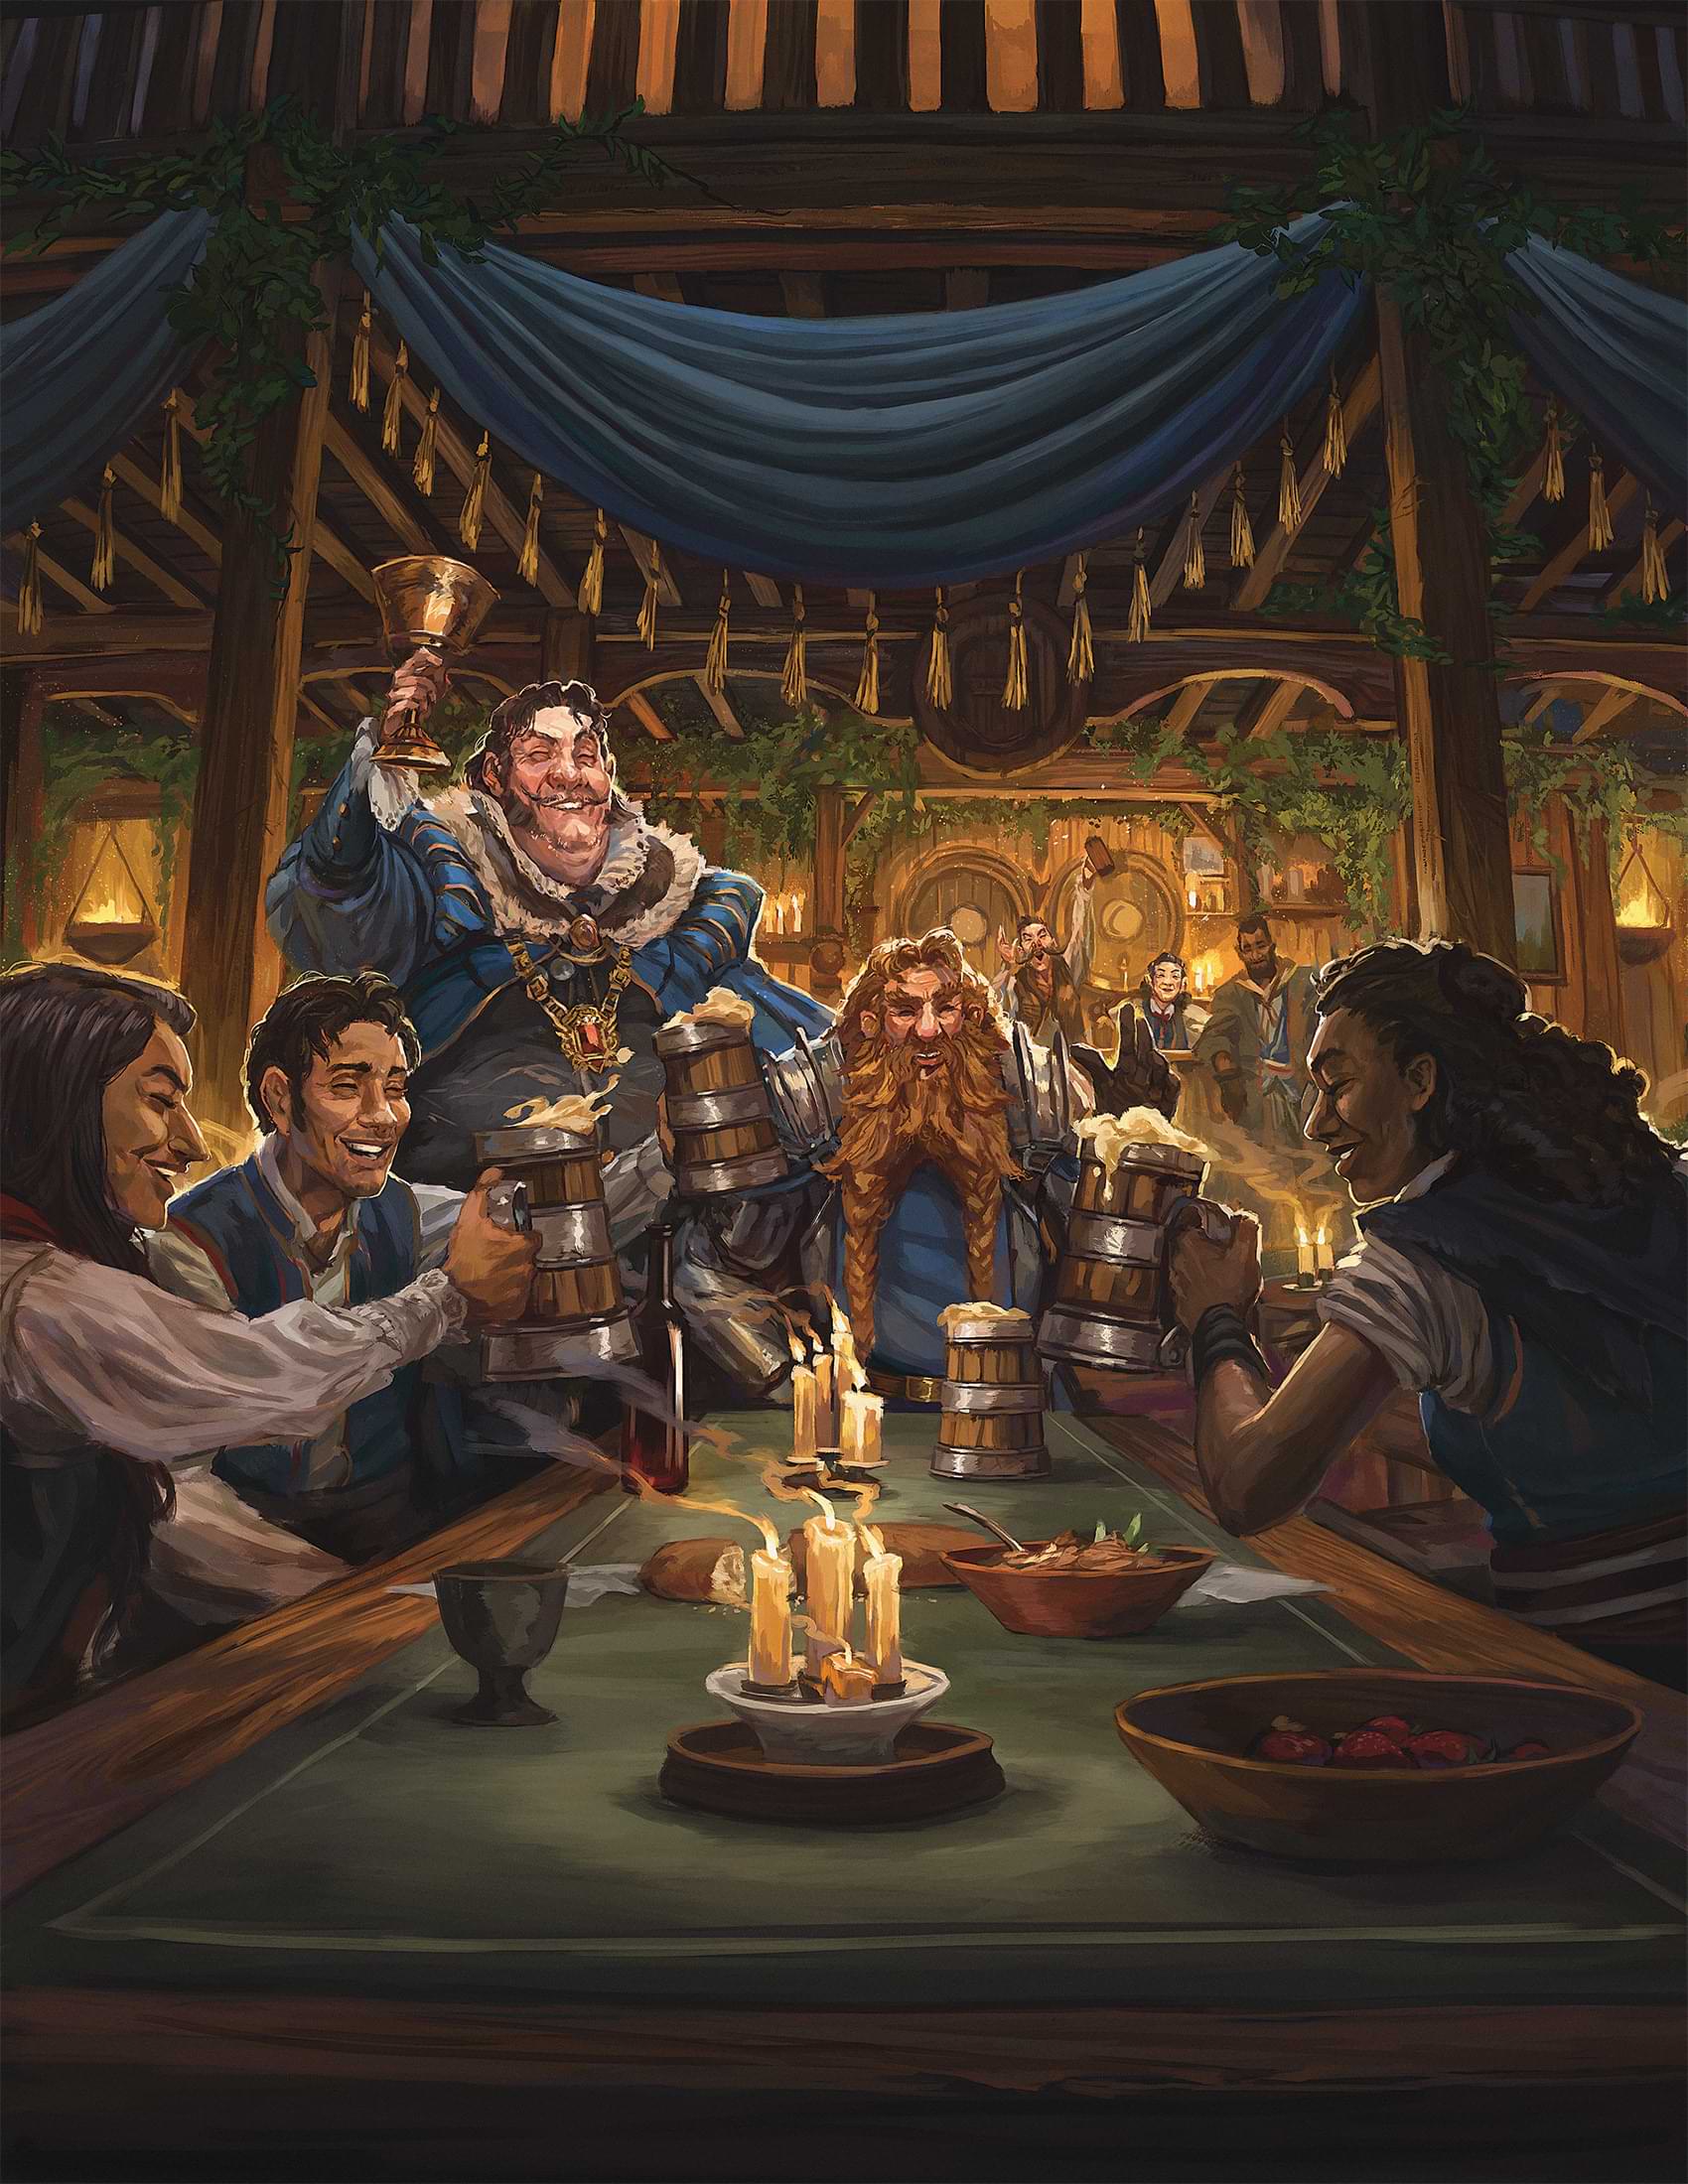 Patrons of a tavern cheerily raise their drinks